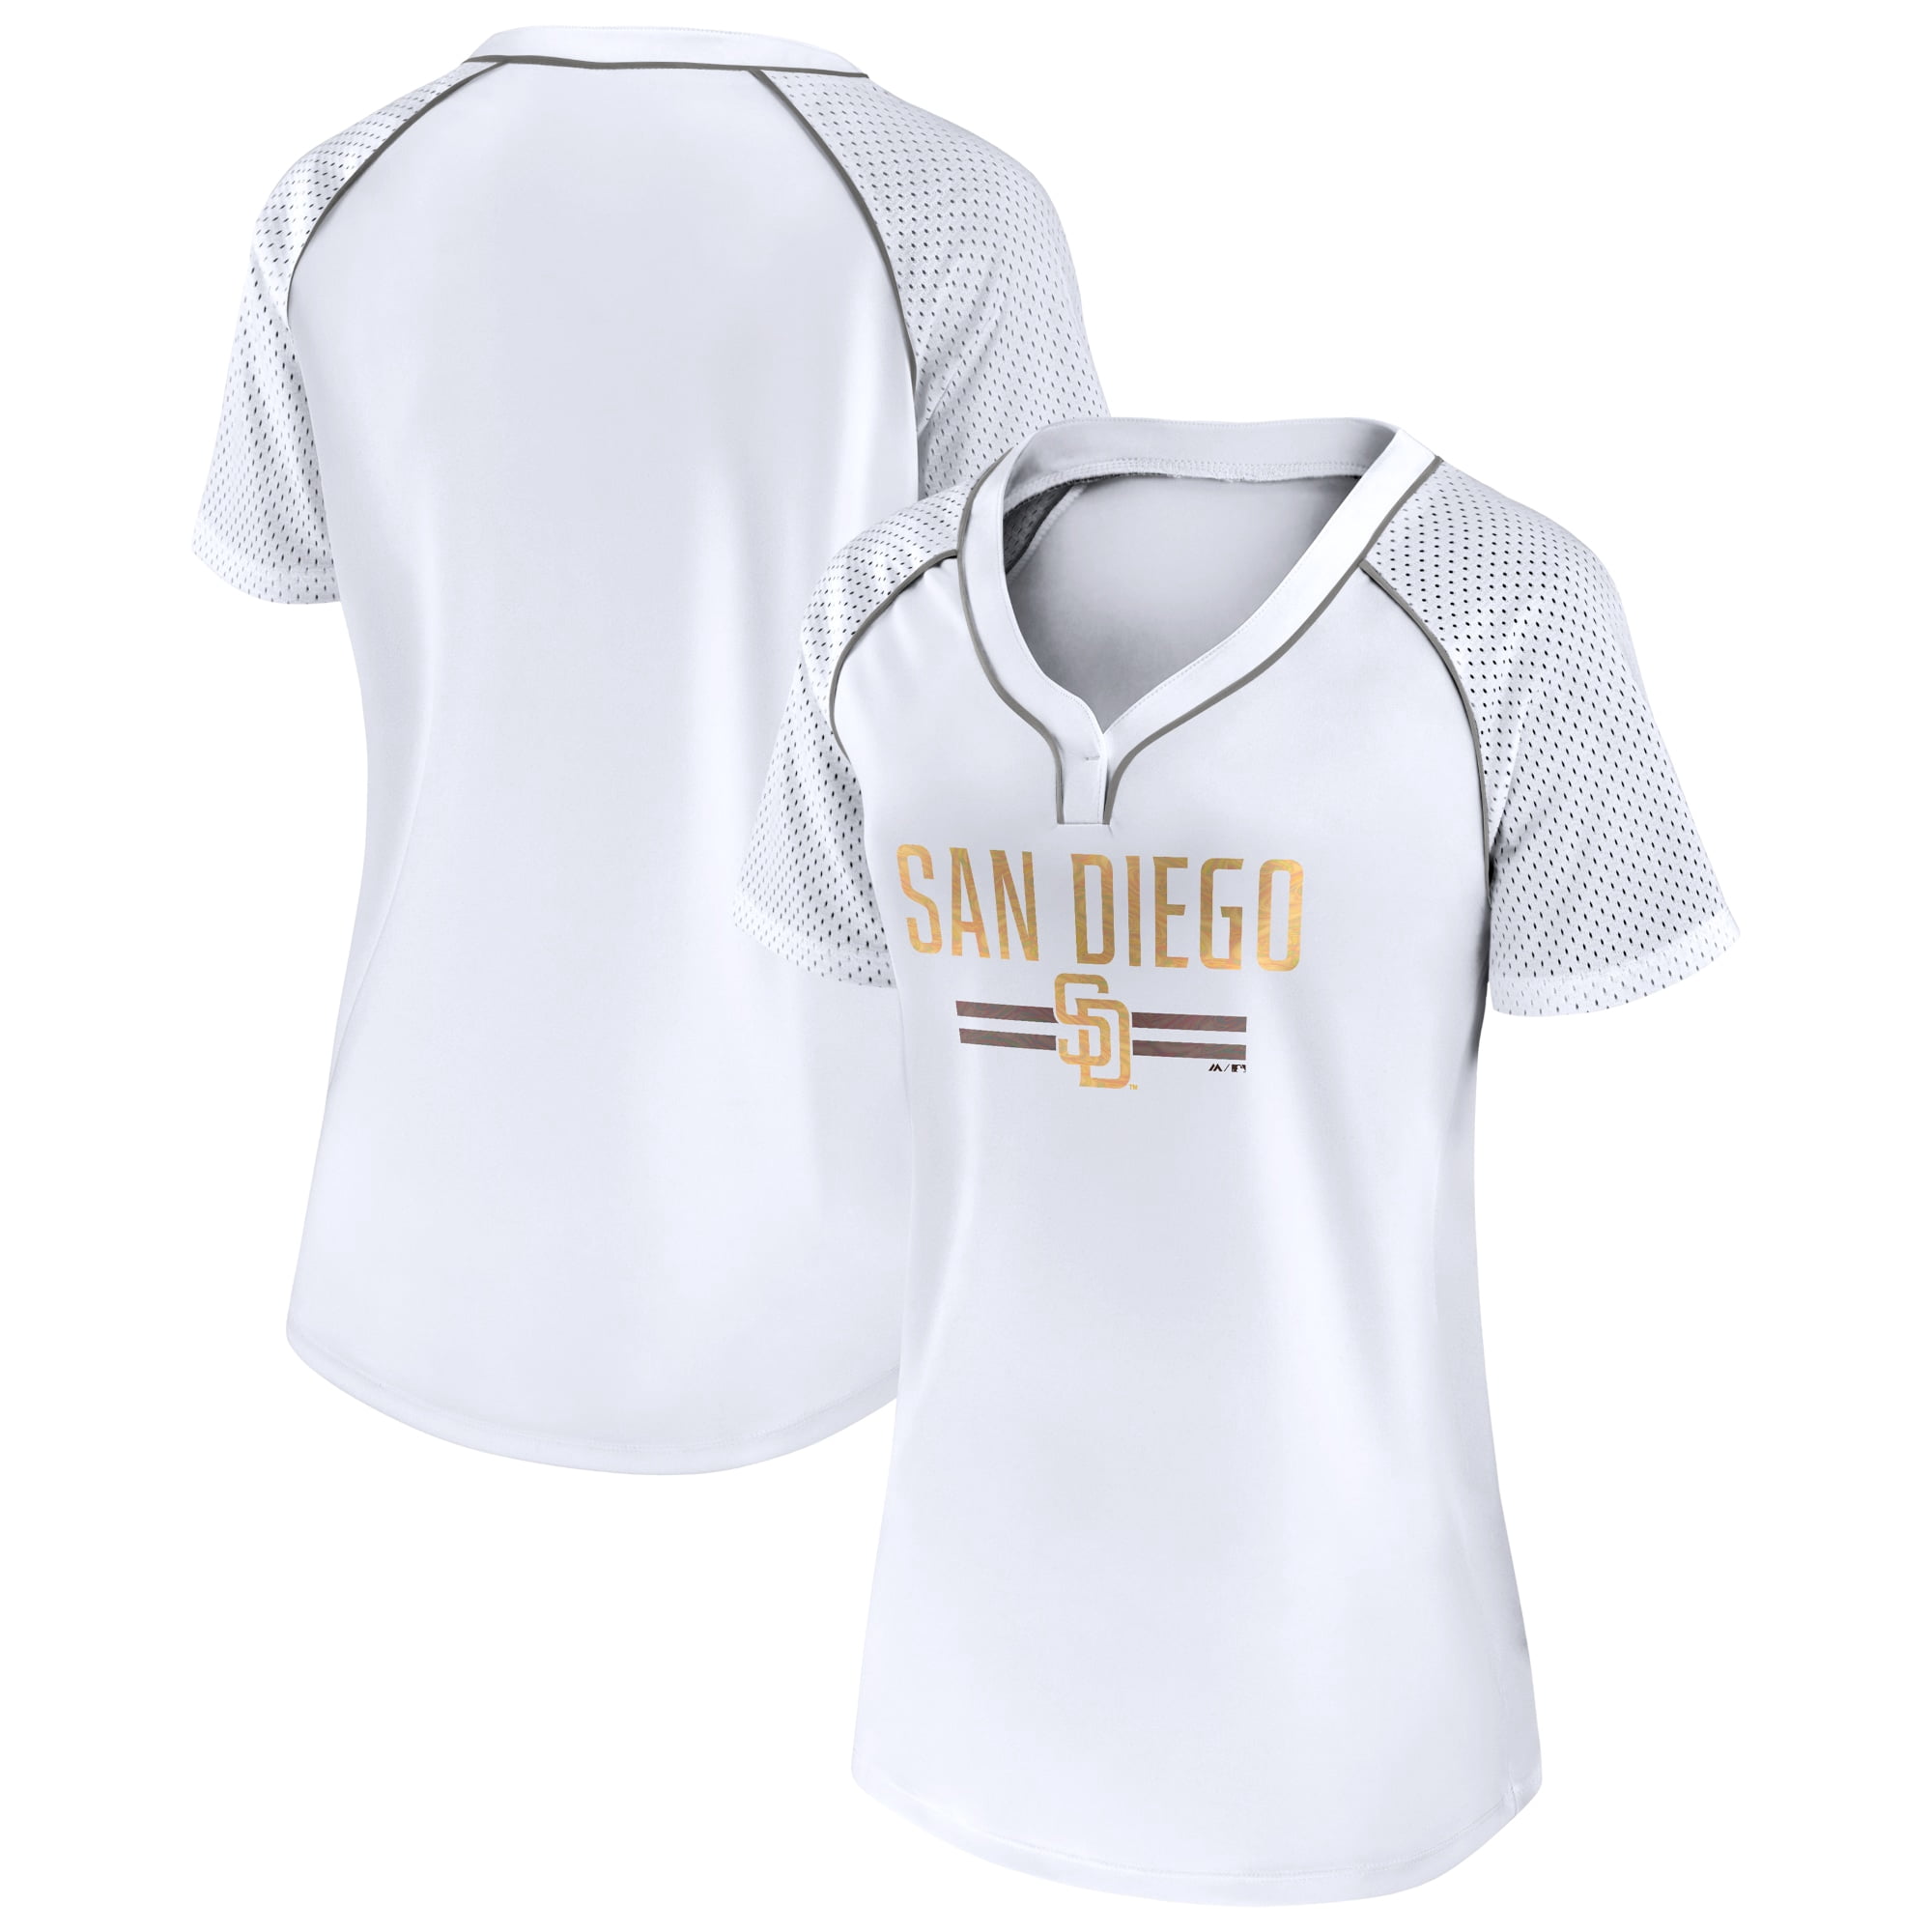 Women's Fanatics Branded White San Diego Padres Play Calling